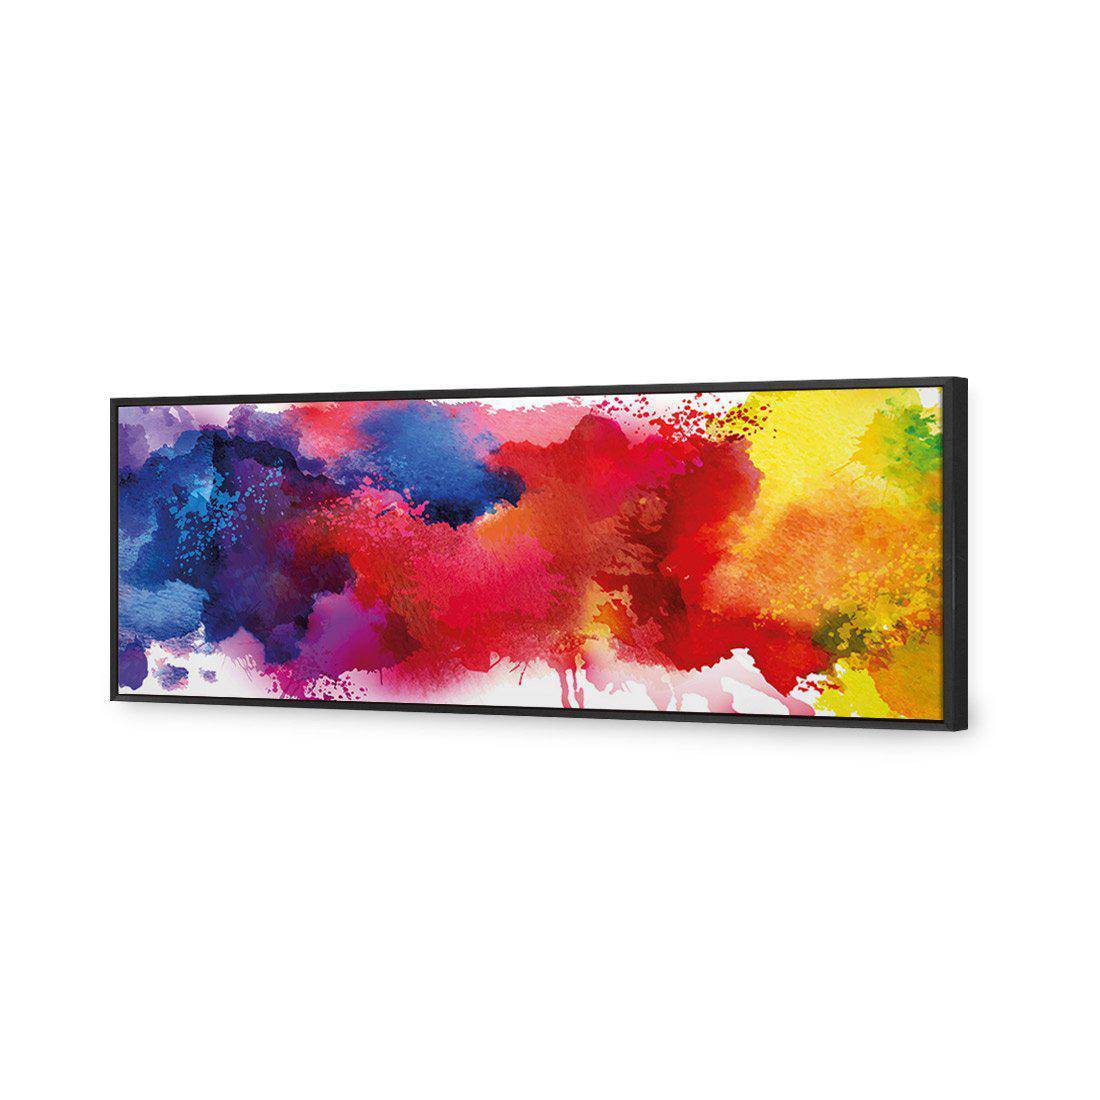 Primary Stains Canvas Art-Canvas-Wall Art Designs-60x20cm-Canvas - Black Frame-Wall Art Designs